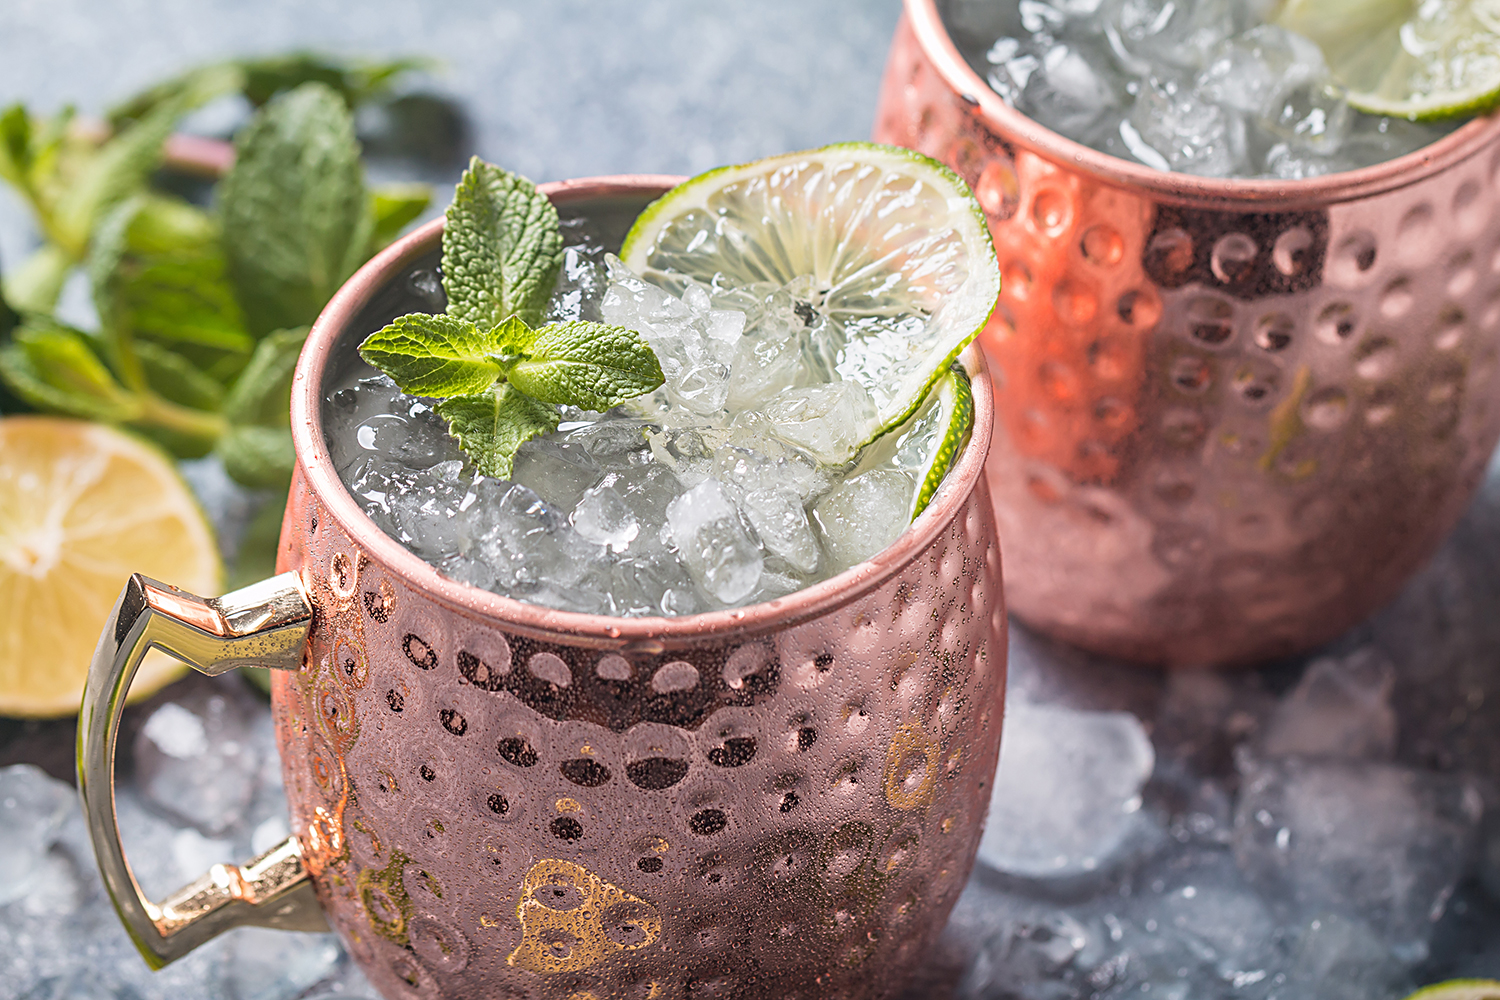 https://www.themanual.com/wp-content/uploads/sites/9/2021/08/moscow-mule-cocktail-drink-mug-ice-lime.jpg?fit=800%2C800&p=1